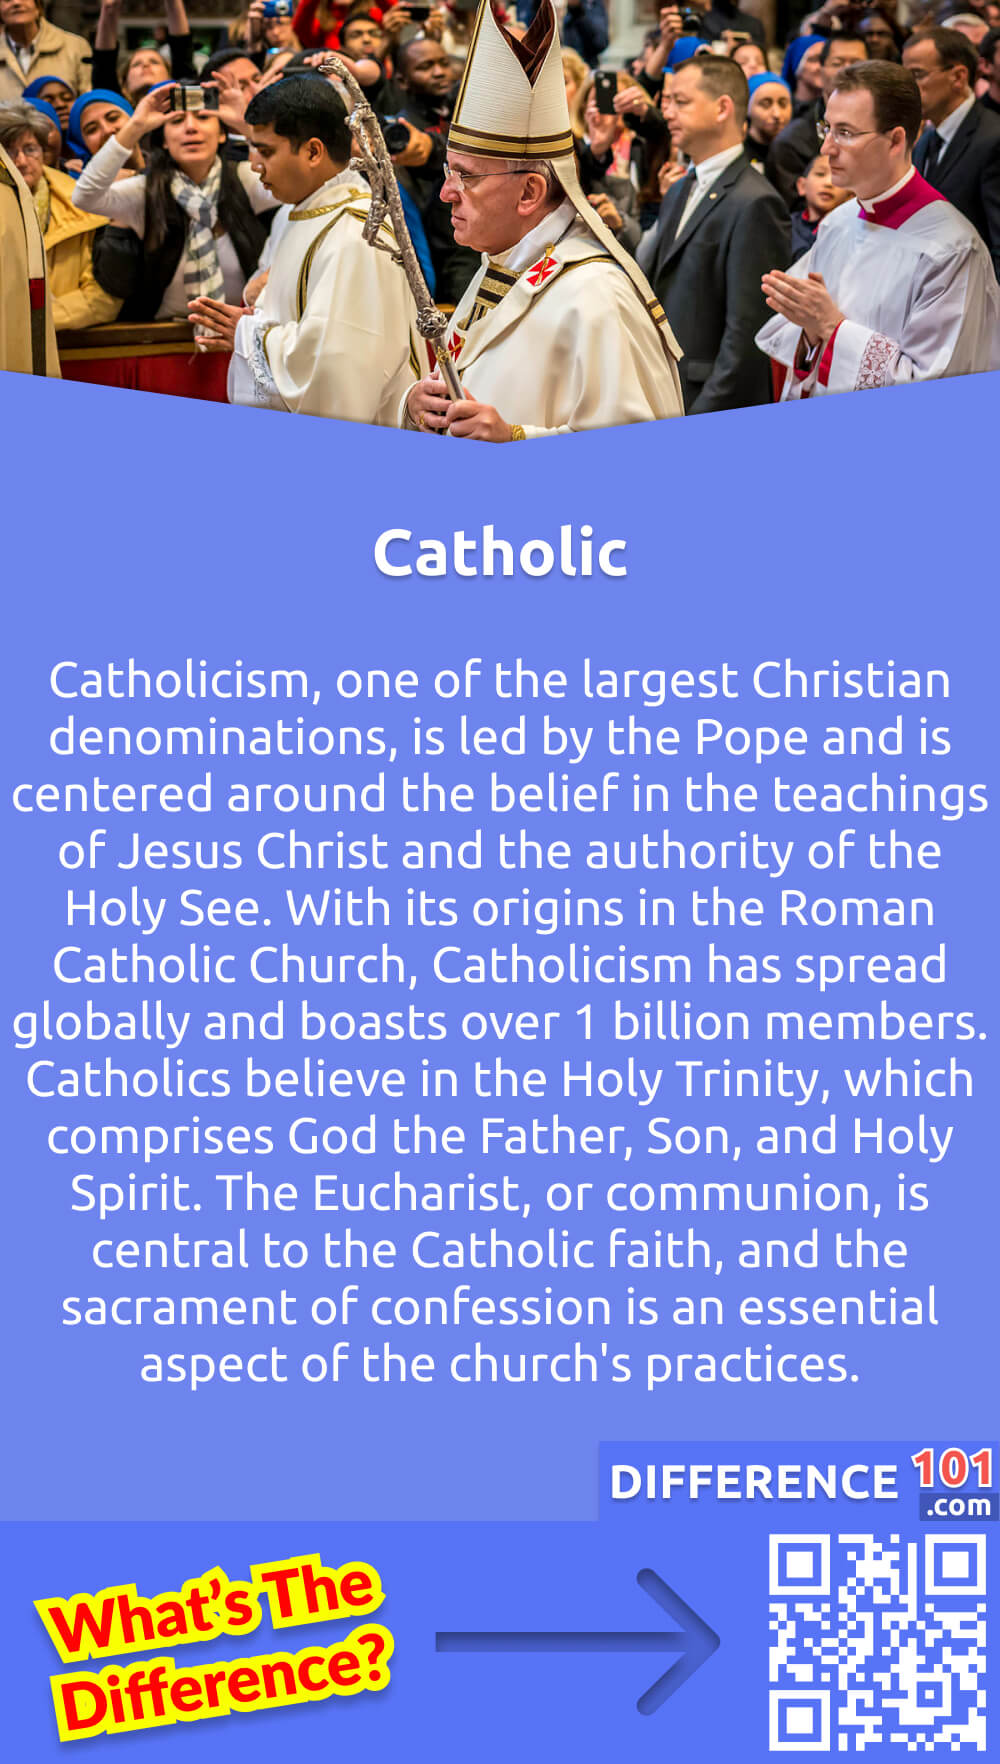 What Is Catholic? Catholicism, one of the largest Christian denominations, is led by the Pope and is centered around the belief in the teachings of Jesus Christ and the authority of the Holy See. With its origins in the Roman Catholic Church, Catholicism has spread globally and boasts over 1 billion members. Catholics believe in the Holy Trinity, which comprises God the Father, Son, and Holy Spirit. The Eucharist, or communion, is central to the Catholic faith, and the sacrament of confession is an essential aspect of the church's practices. With a rich history that stretches back over two thousand years, Catholicism continues to influence society and shape the lives of its devotees to this day.